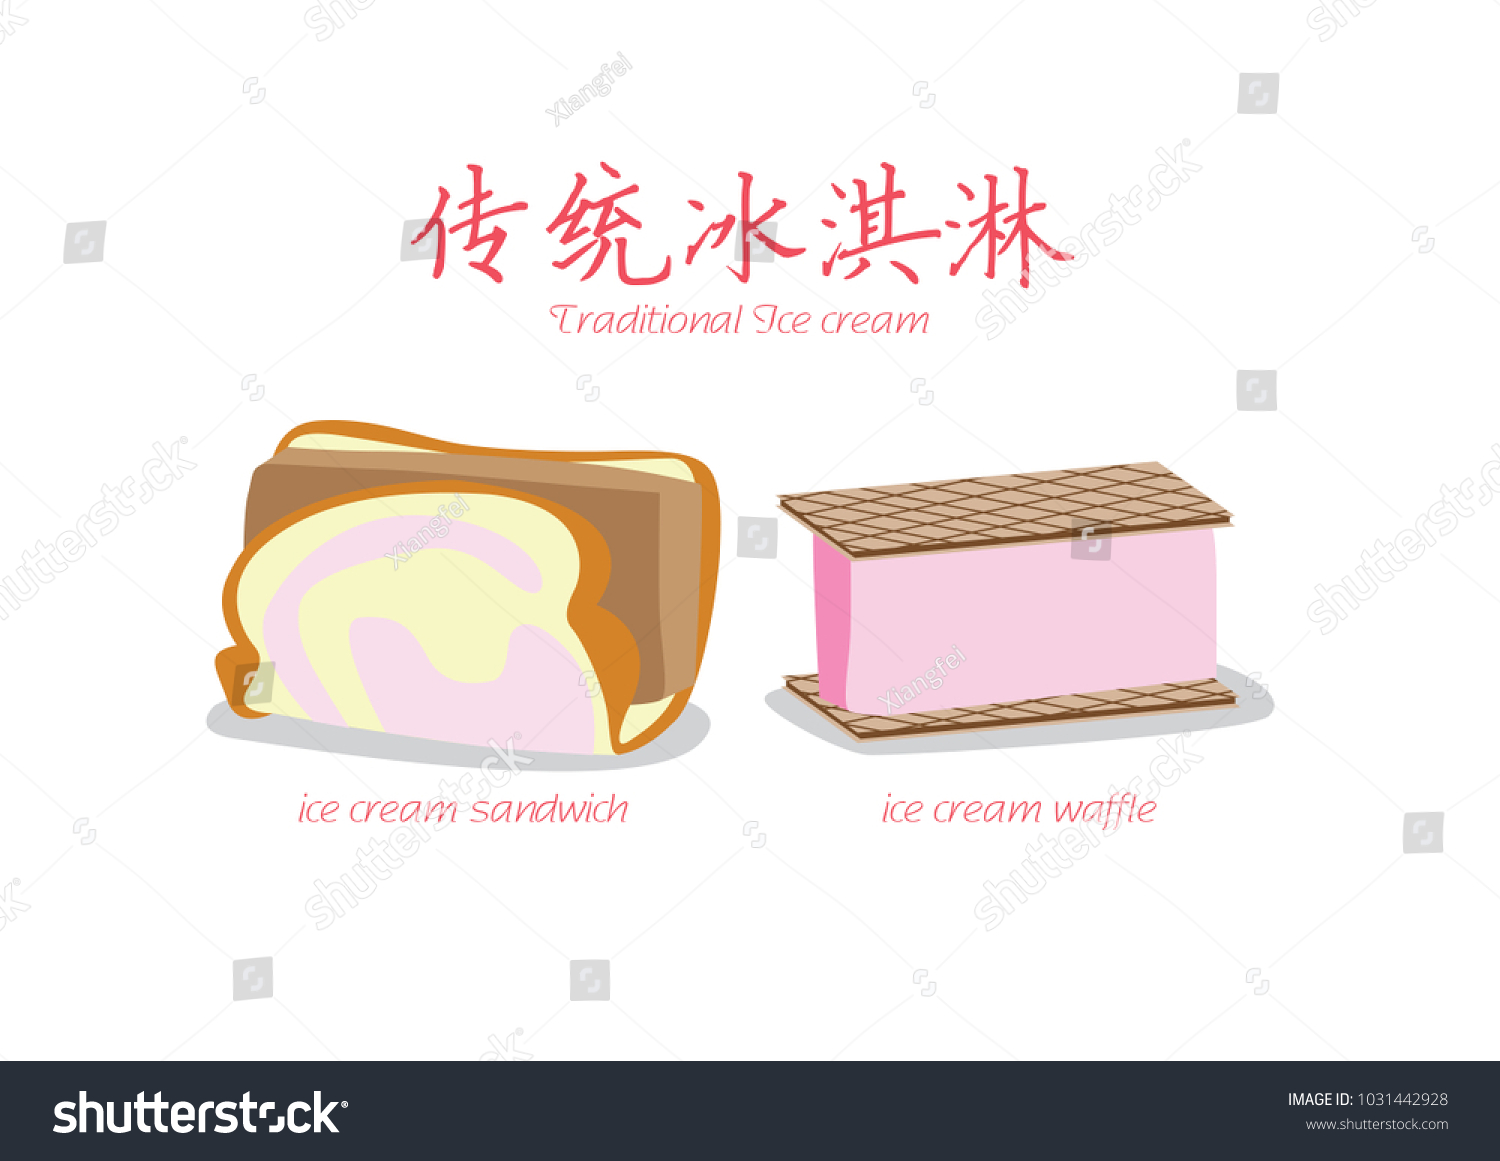 Traditional Ice Cream Sandwich Waffle Singapore Stock Vector Royalty Free